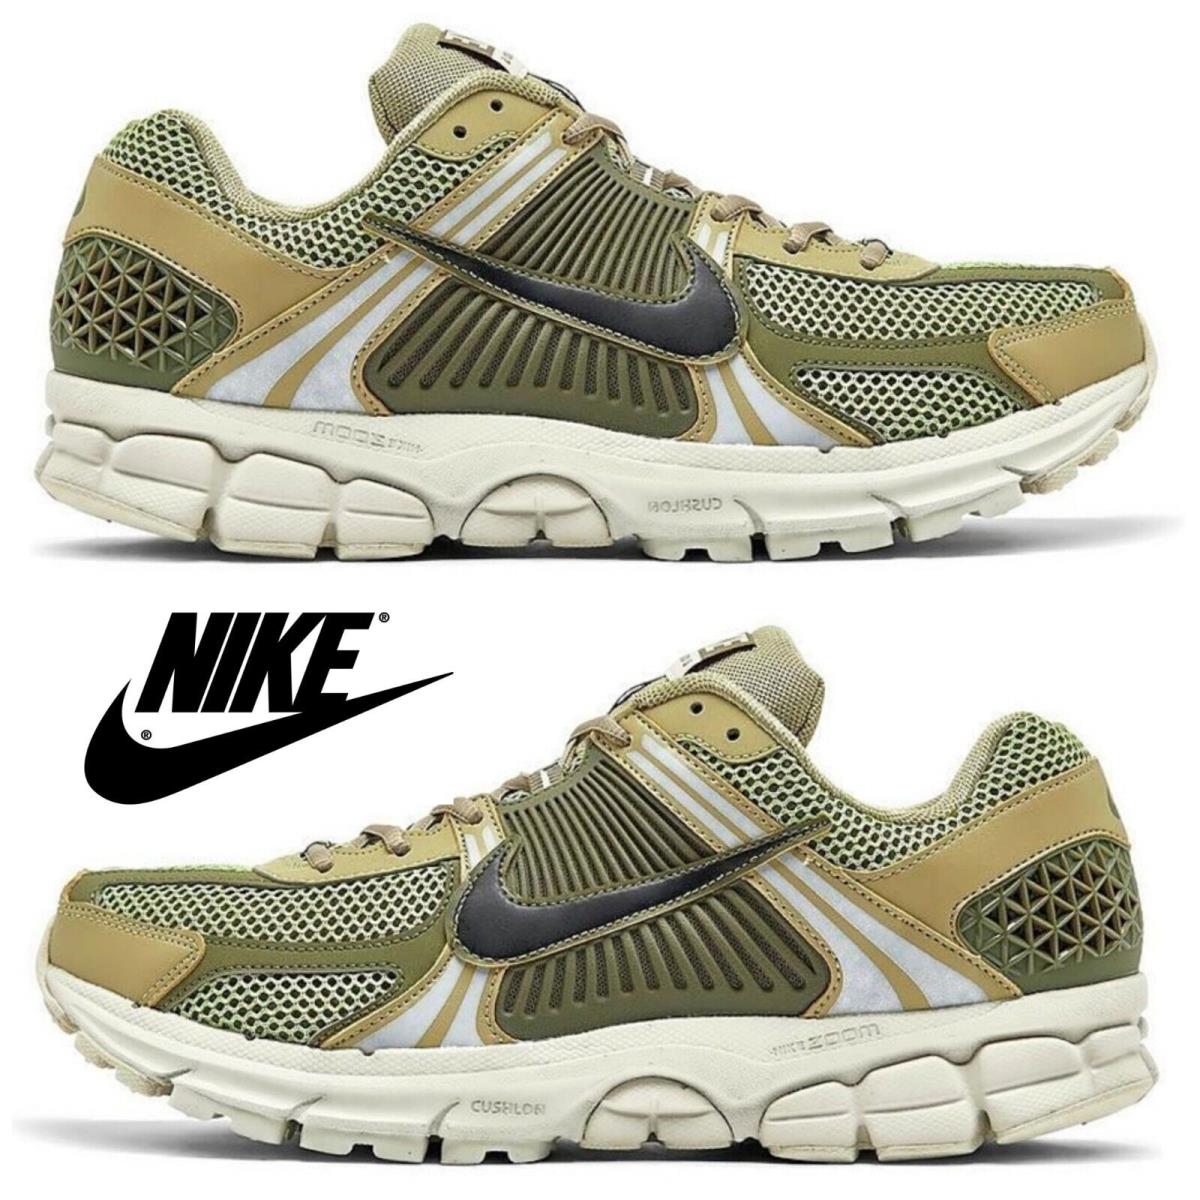 Nike Air Zoom Vomero 5 Men`s Casual Sneakers Comfort Lightweight Shoes - Green, Manufacturer: Neutral Olive/Black/Medium Olive